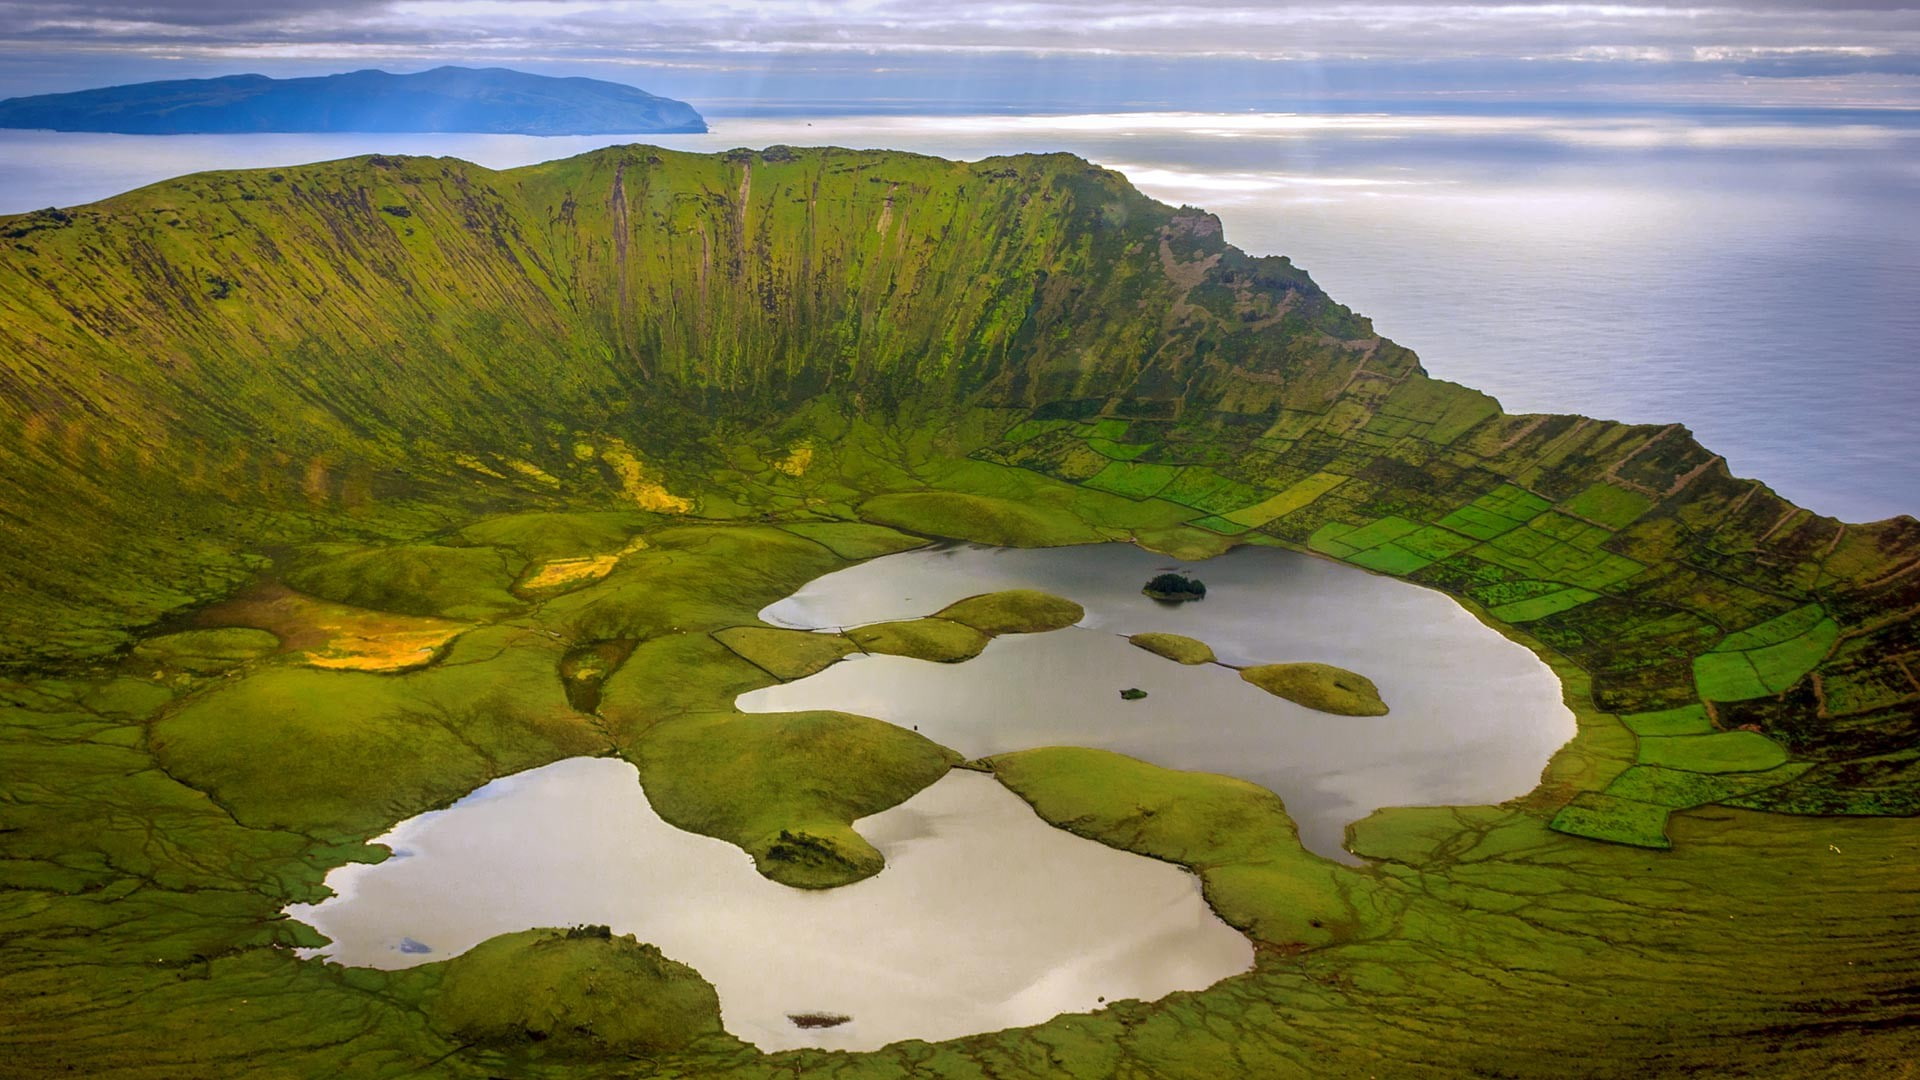 lake  nature  clouds  field  water  Portugal  grass  sun rays  birds eye view  hills  sea  island  landscape  Azores  mountains